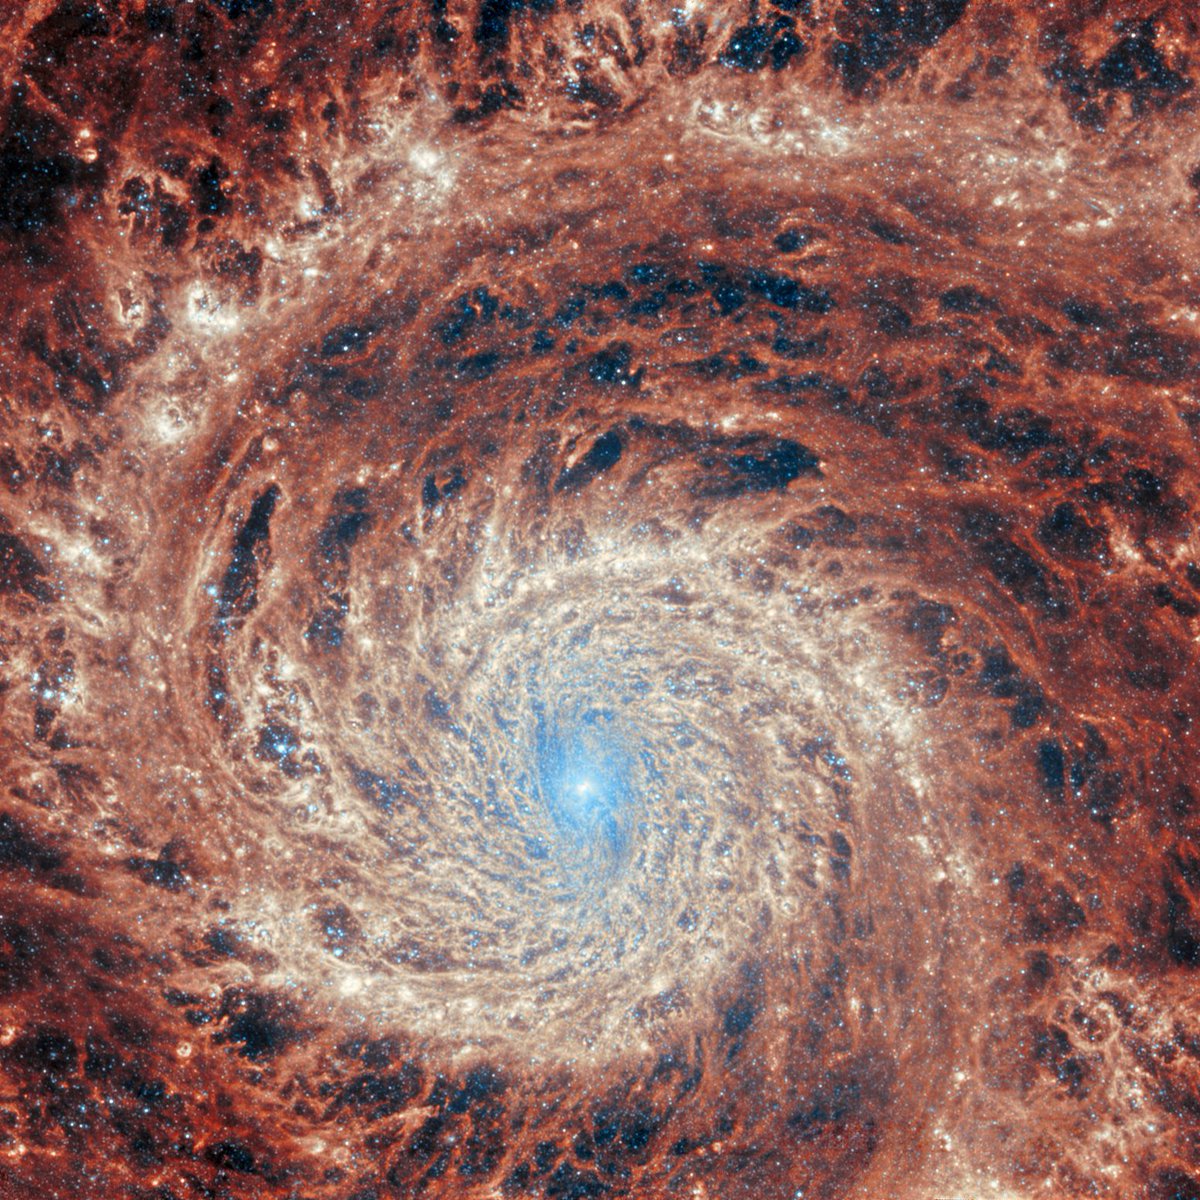 Ripple effect. Seen here by Webb's Mid-Infrared Instrument (MIRI) is the galaxy M51, also known as NGC 5194. The gravity of its neighbor, the dwarf galaxy NGC 5195, is thought to be partially responsible for those prominent & distinct spiral arms!